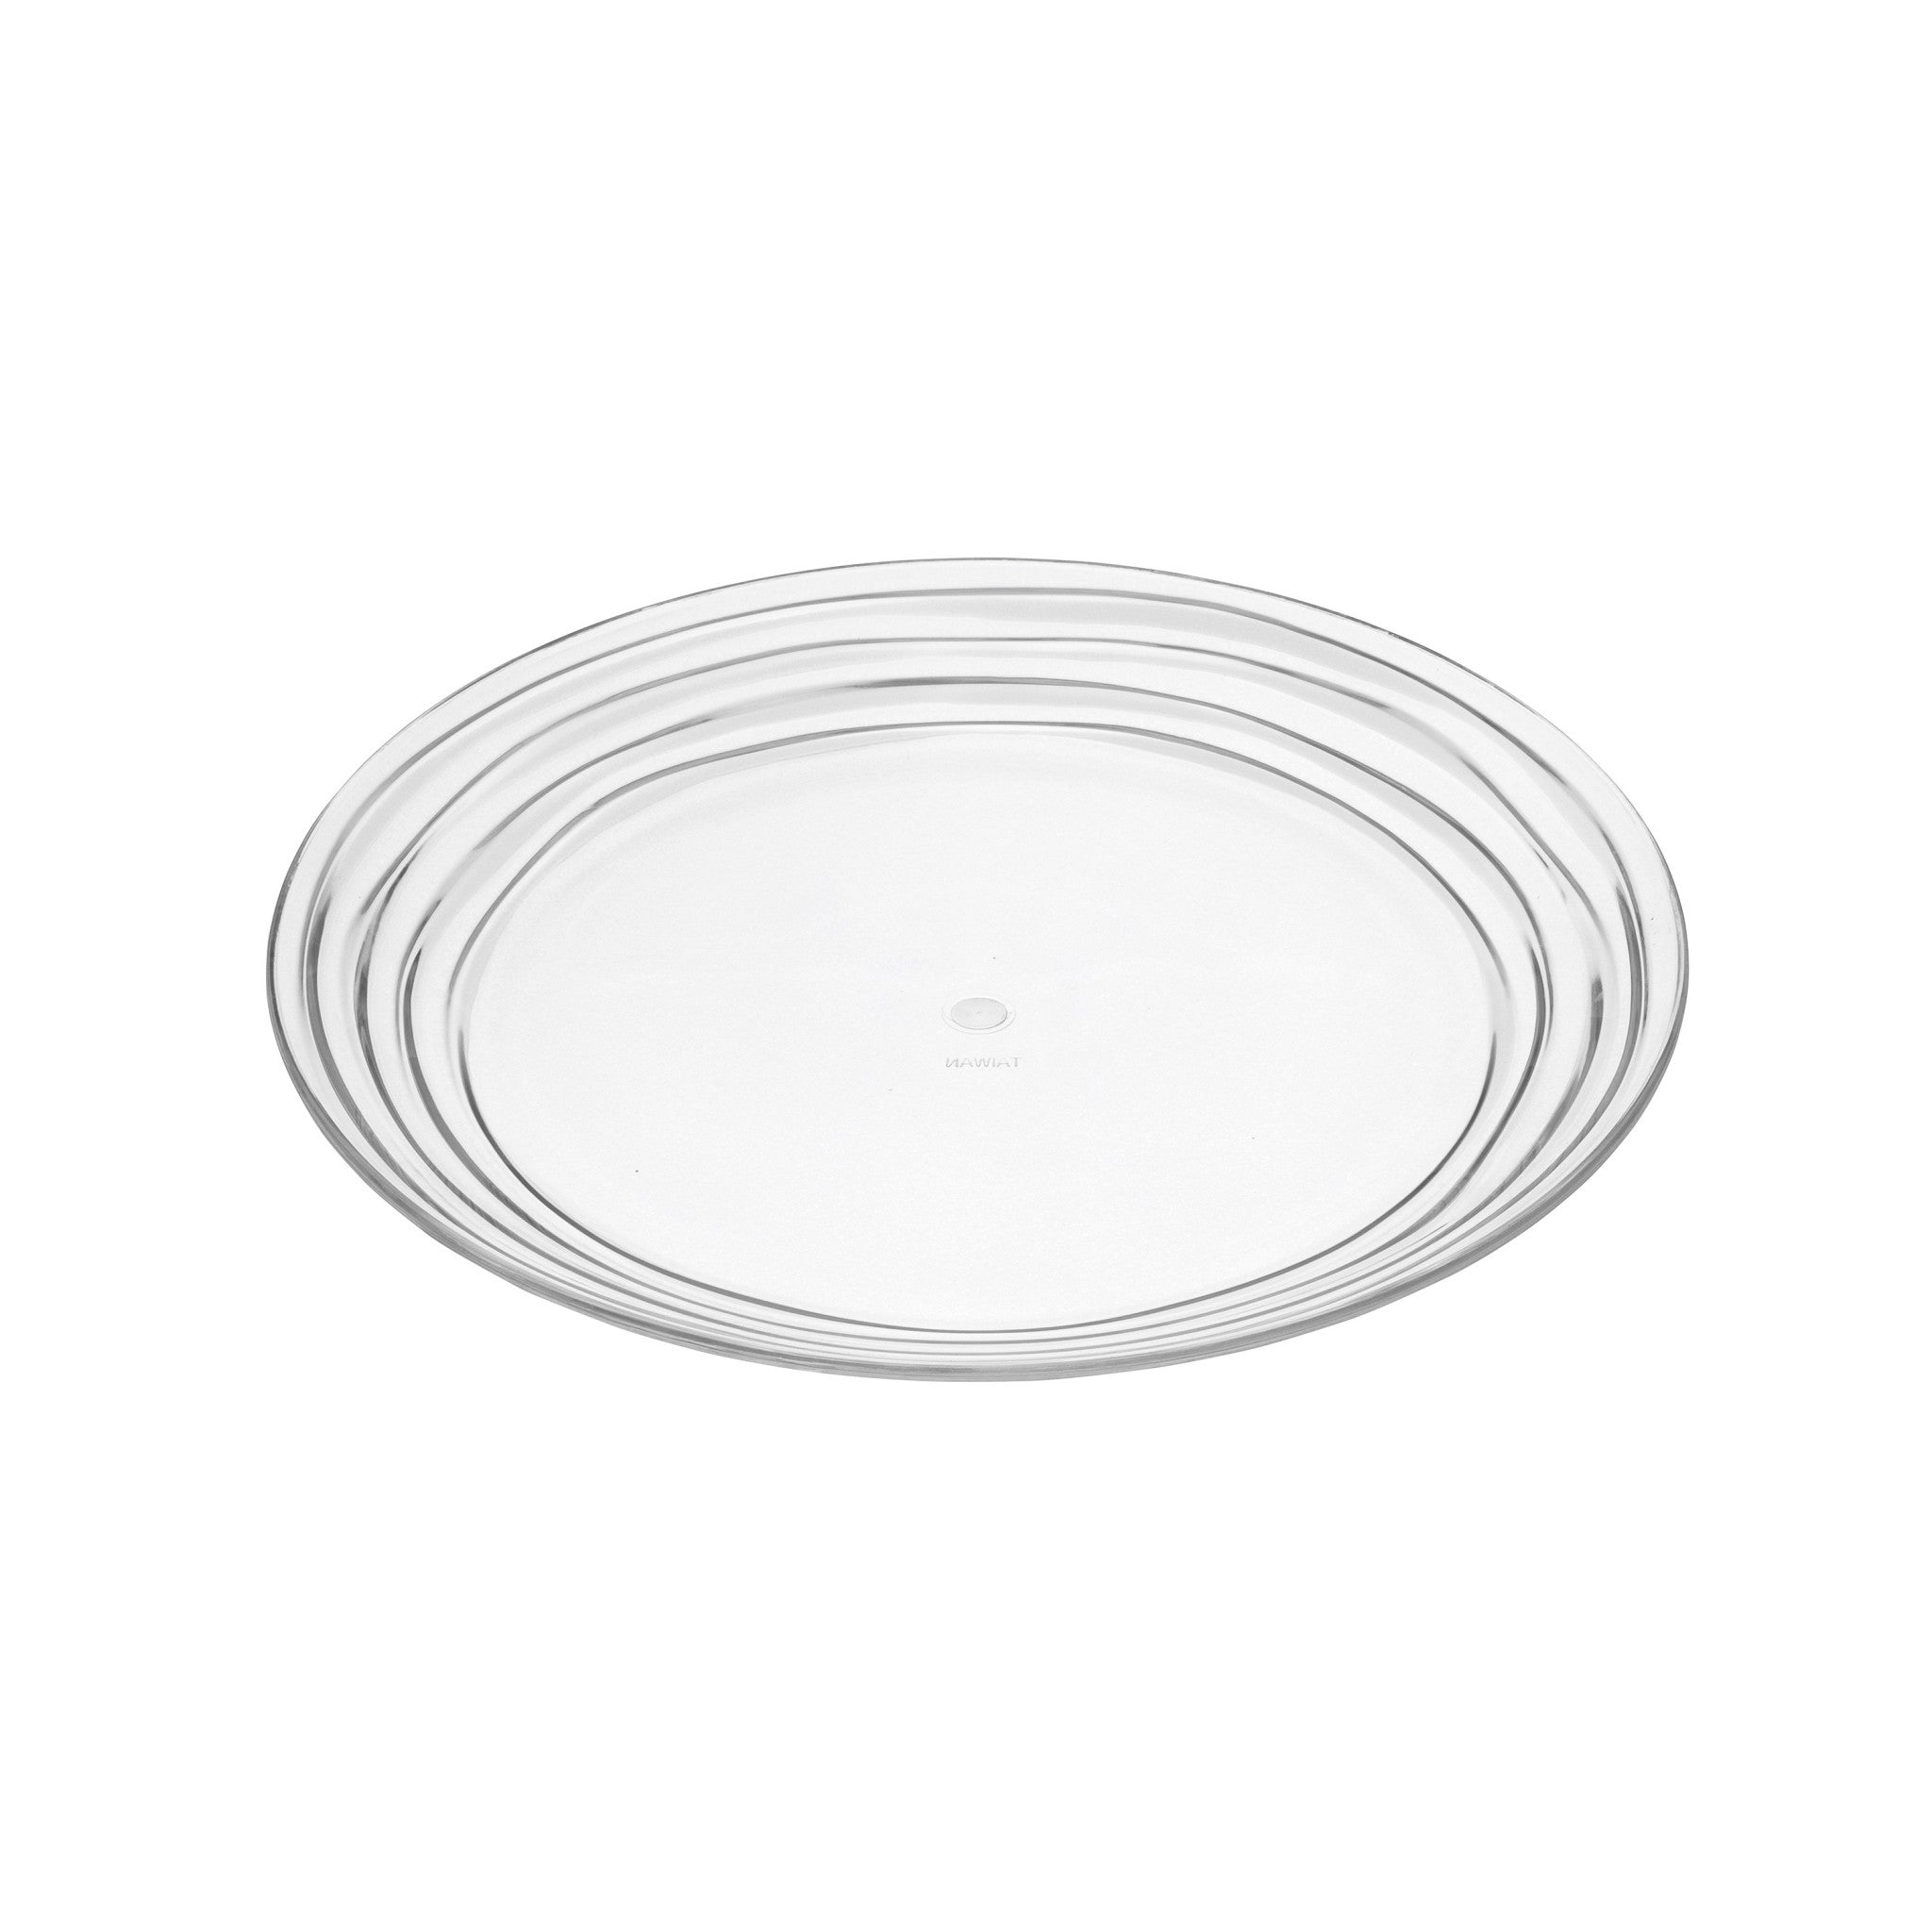 Clear-Four-Piece-Round-Swirl-Acrylic-Service-For-Four-Salad-Plate-Set-Dinnerware-Sets